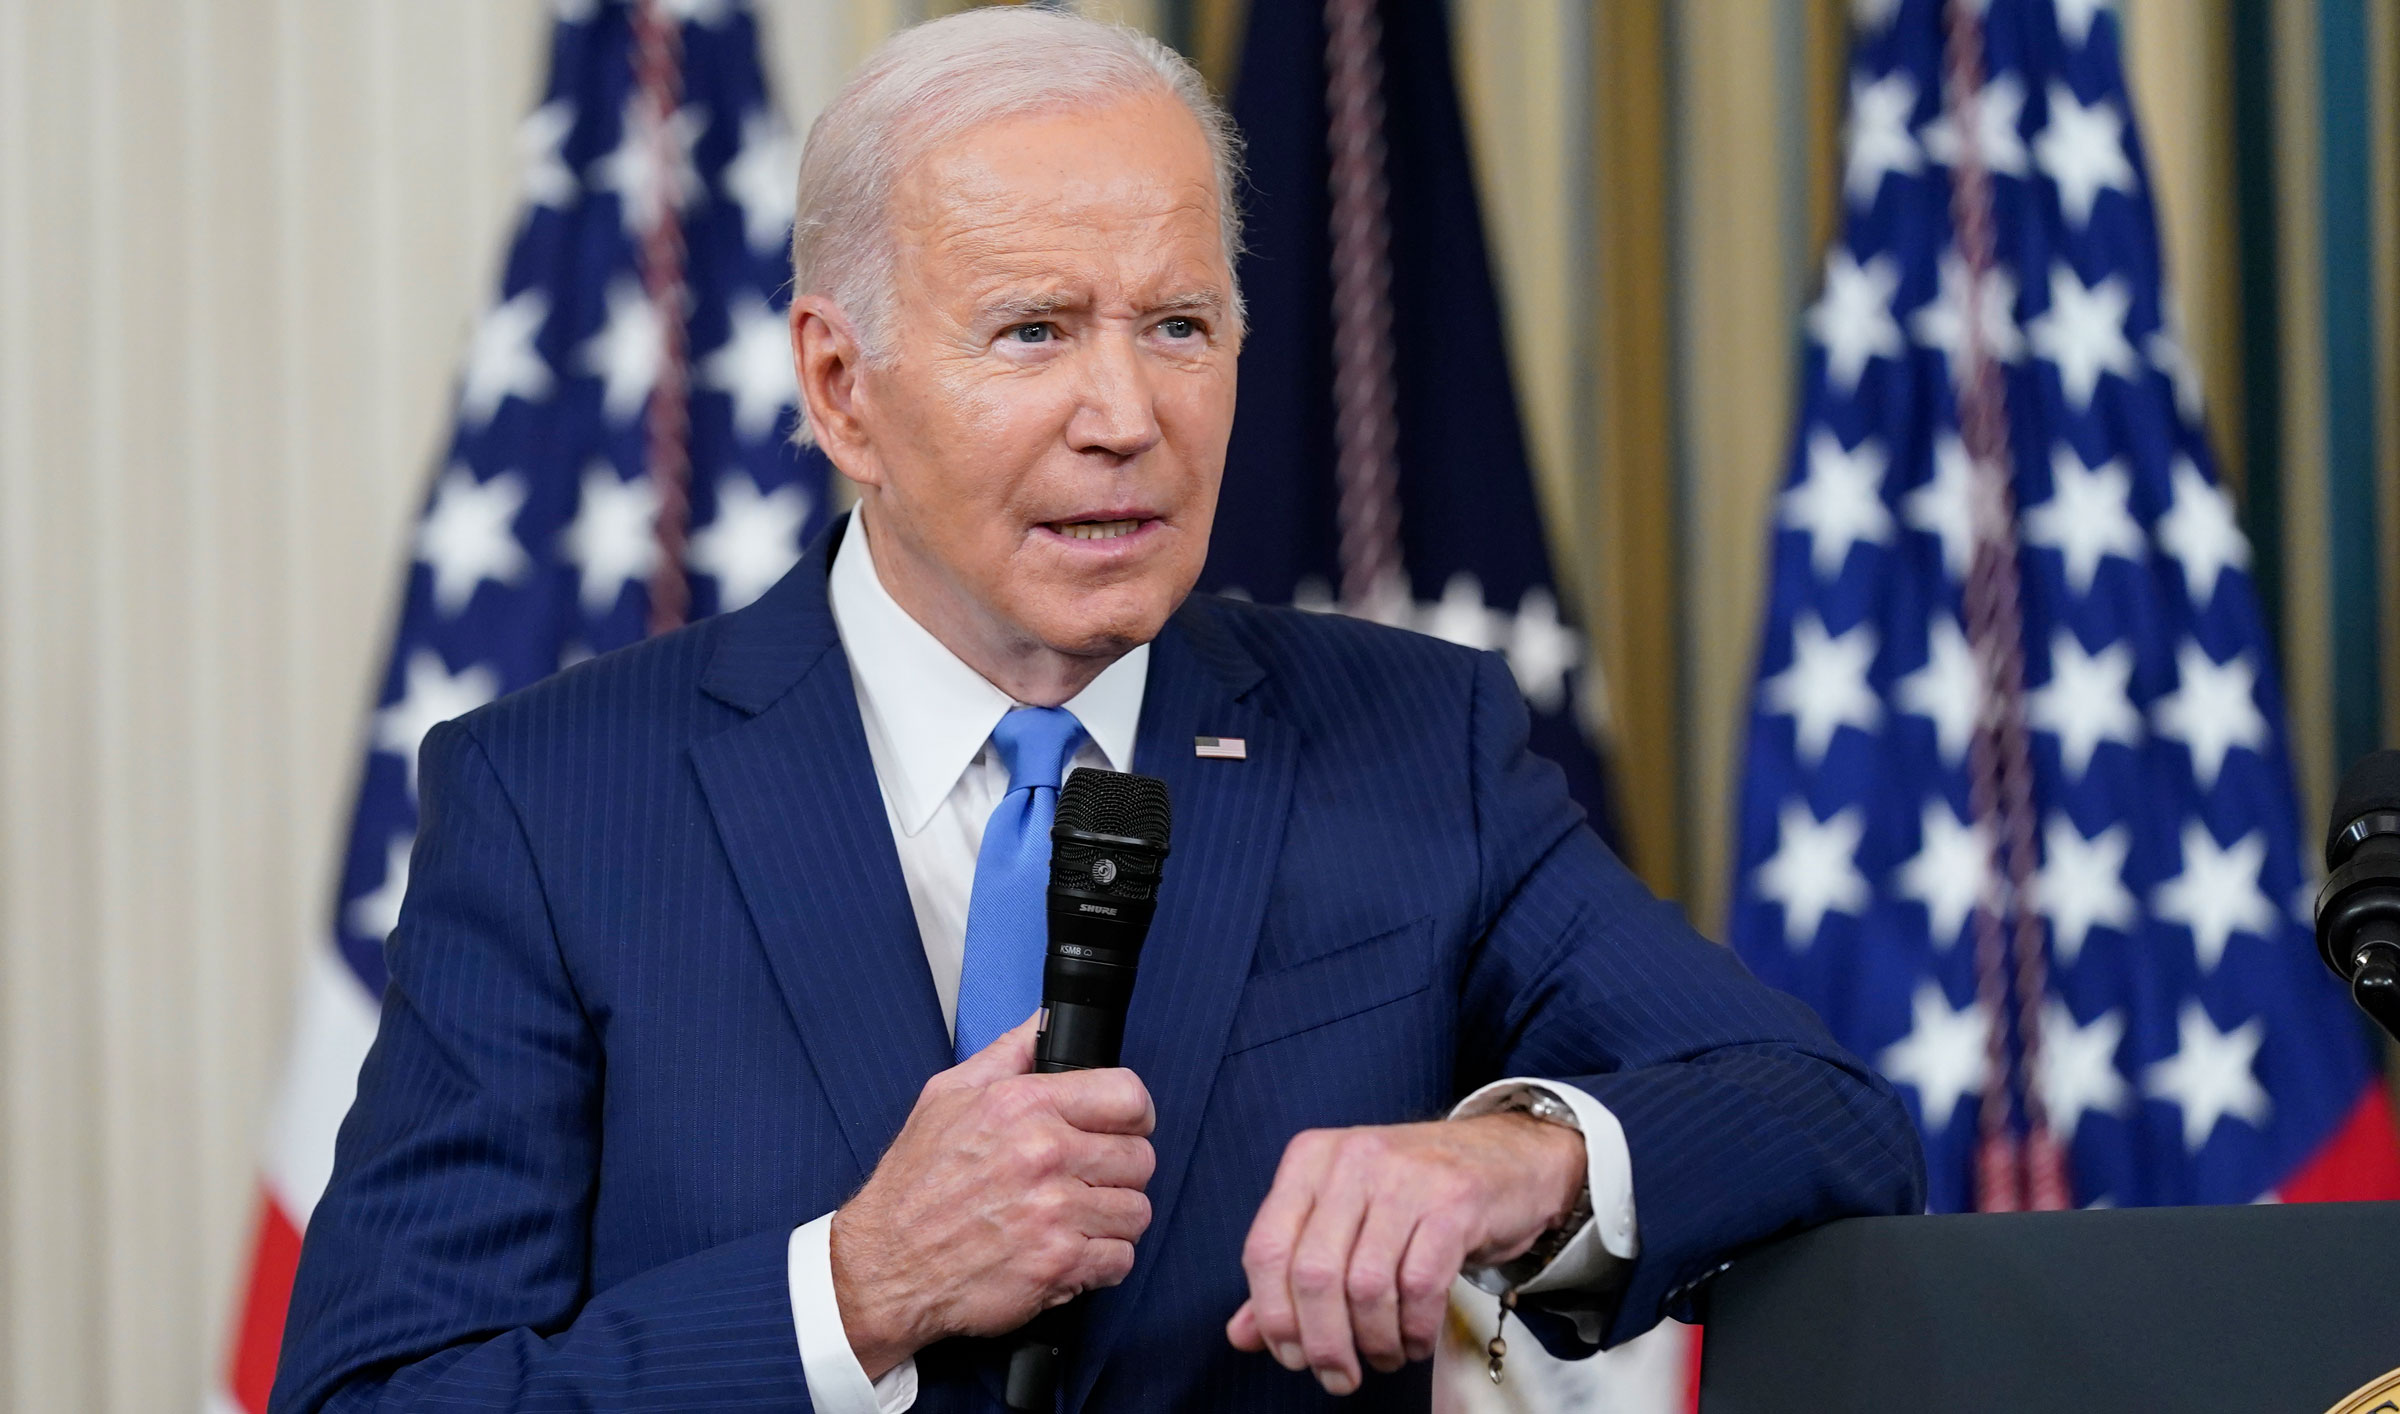 President Joe Biden answers questions from reporters on Wednesday.